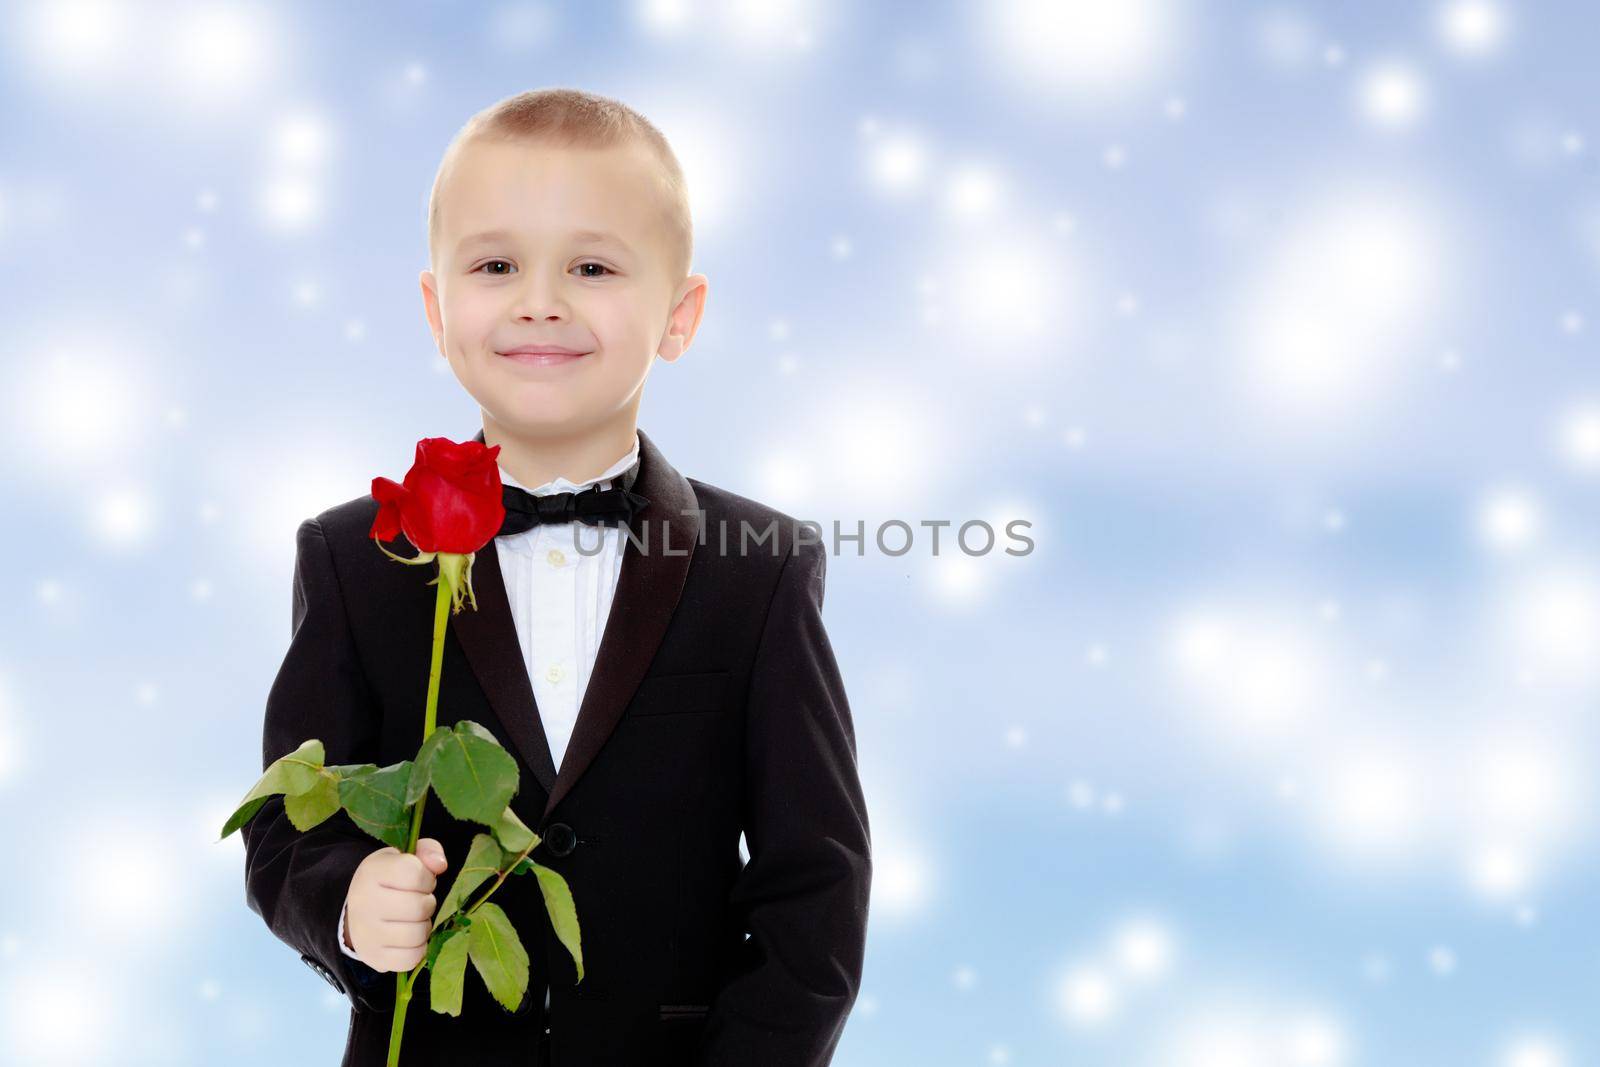 Beautiful little boy in a strict black suit , white shirt and tie.Boy holding a flower of a red rose on a long stem.Blue Christmas festive background with white snowflakes.